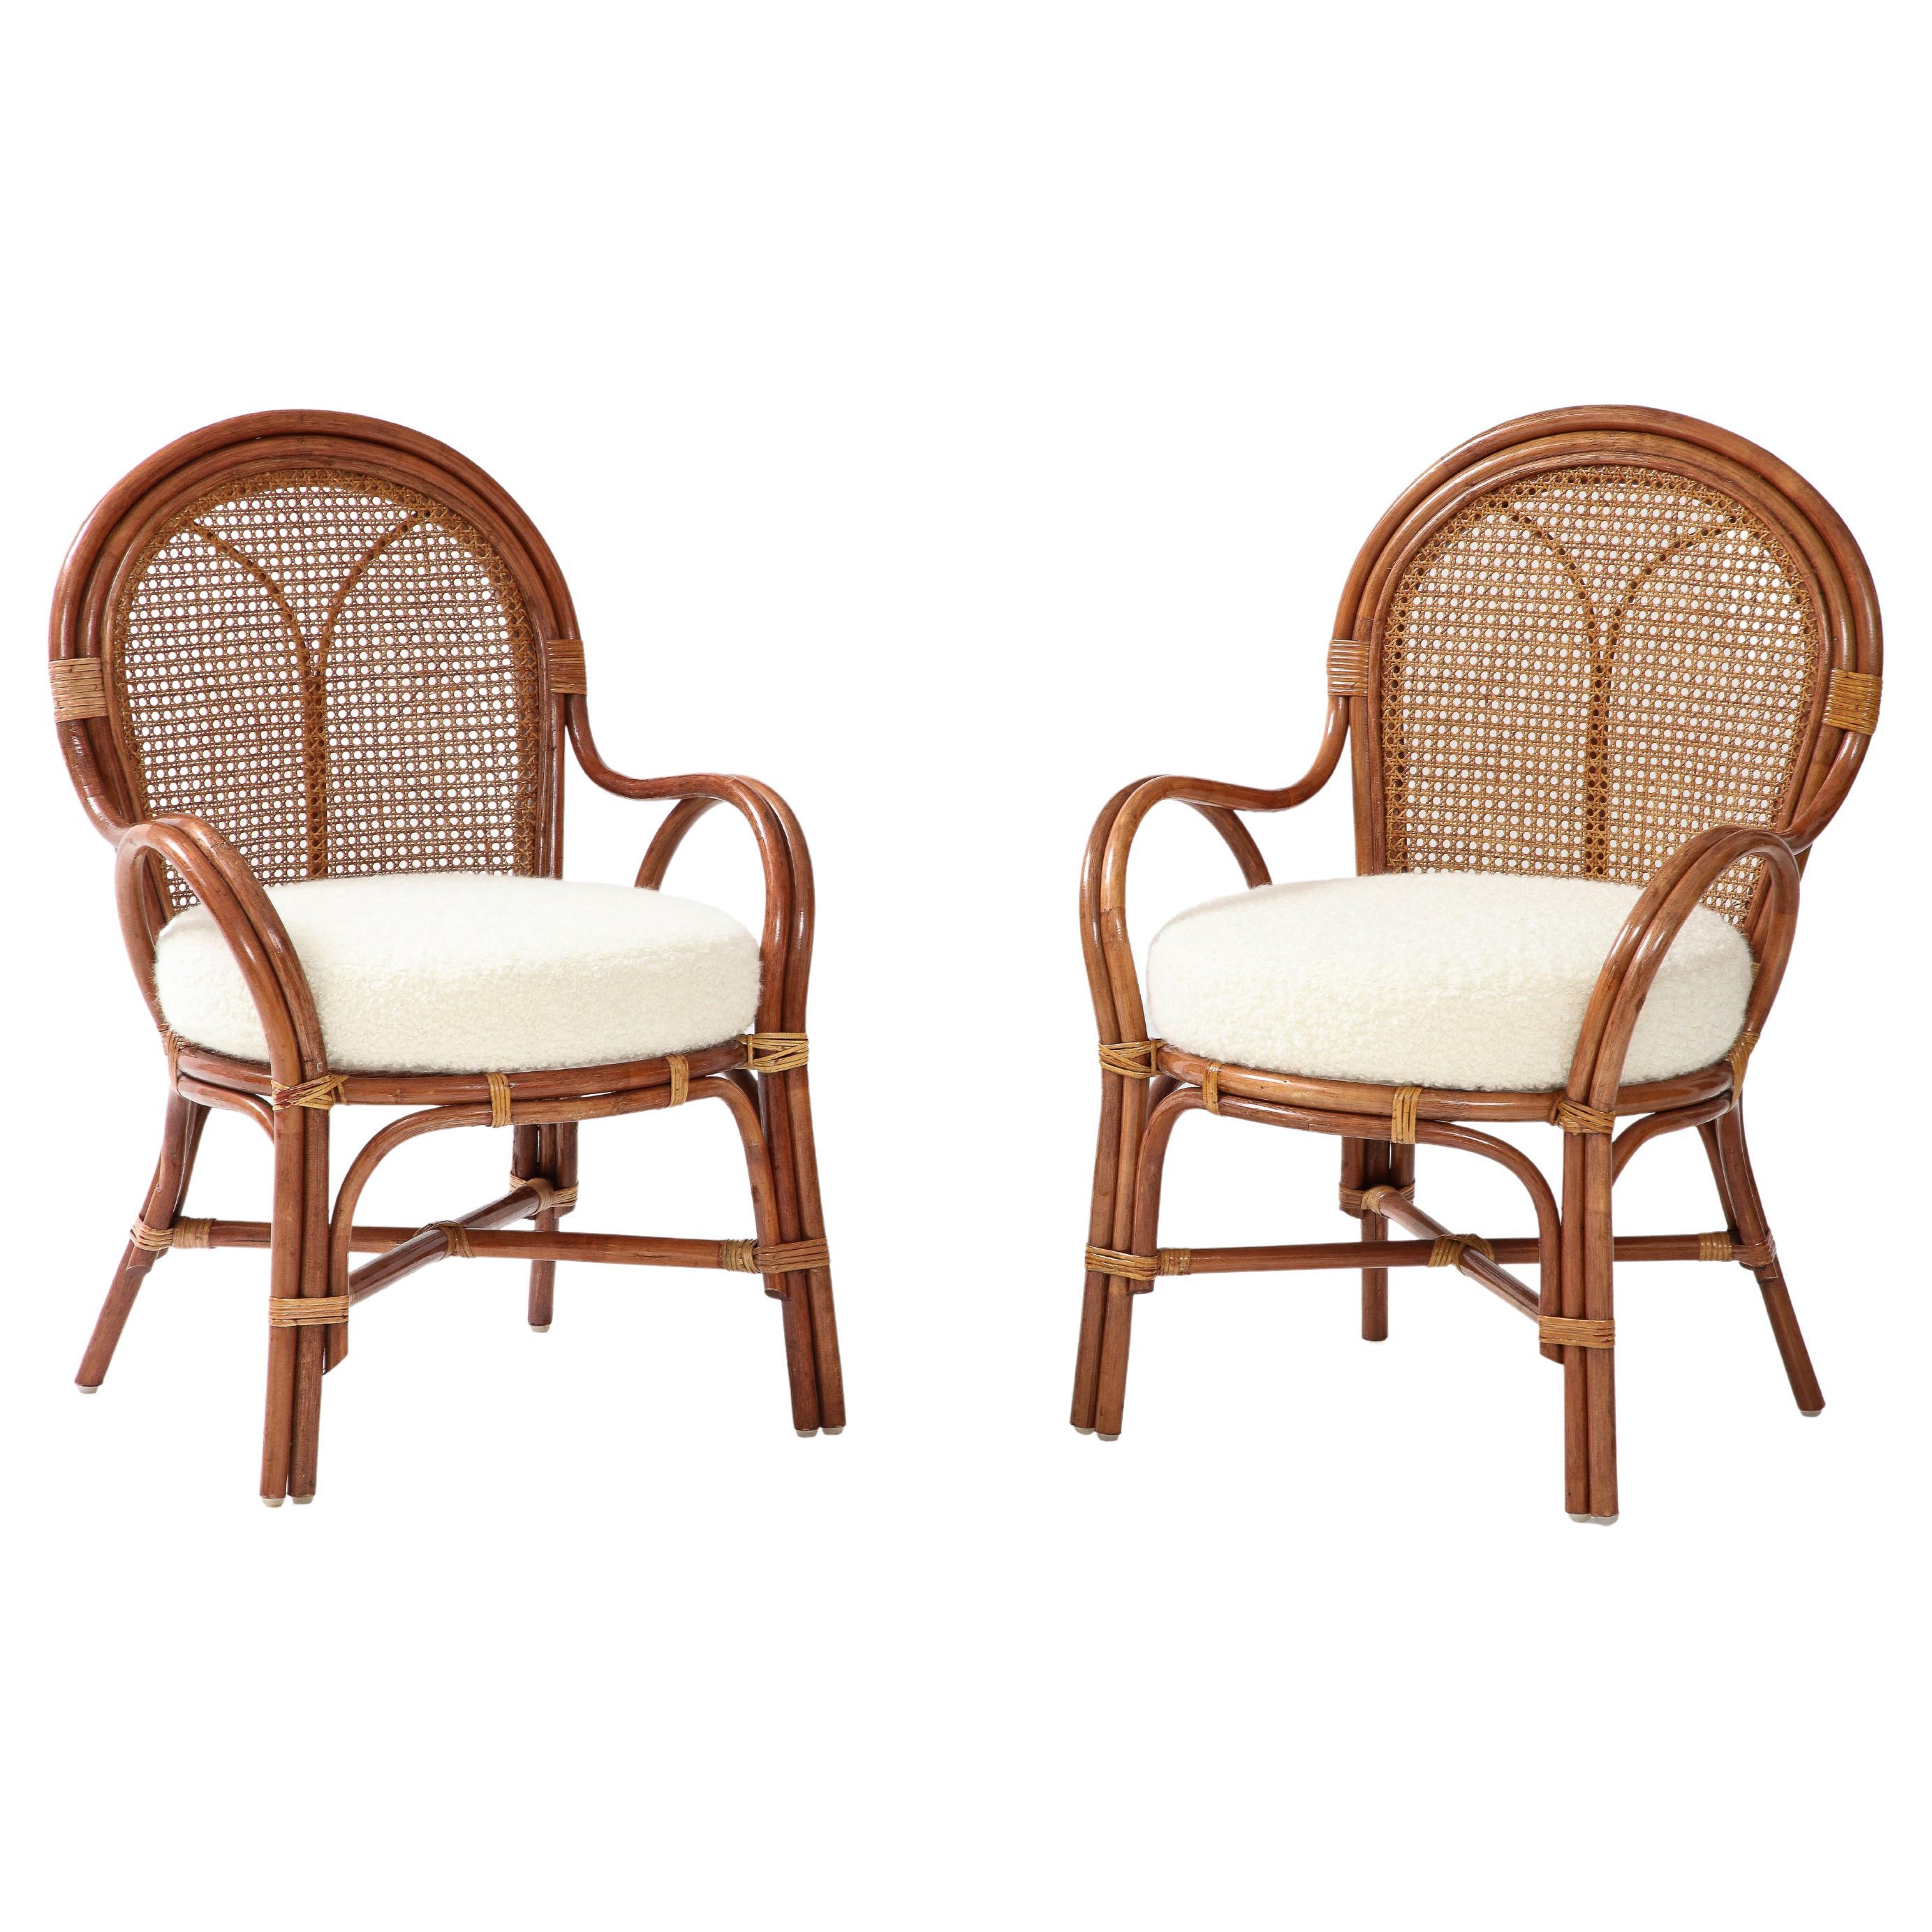 1950s Italian Pair of Bamboo and Rattan Armchairs with Ivory Bouclé Cushions For Sale